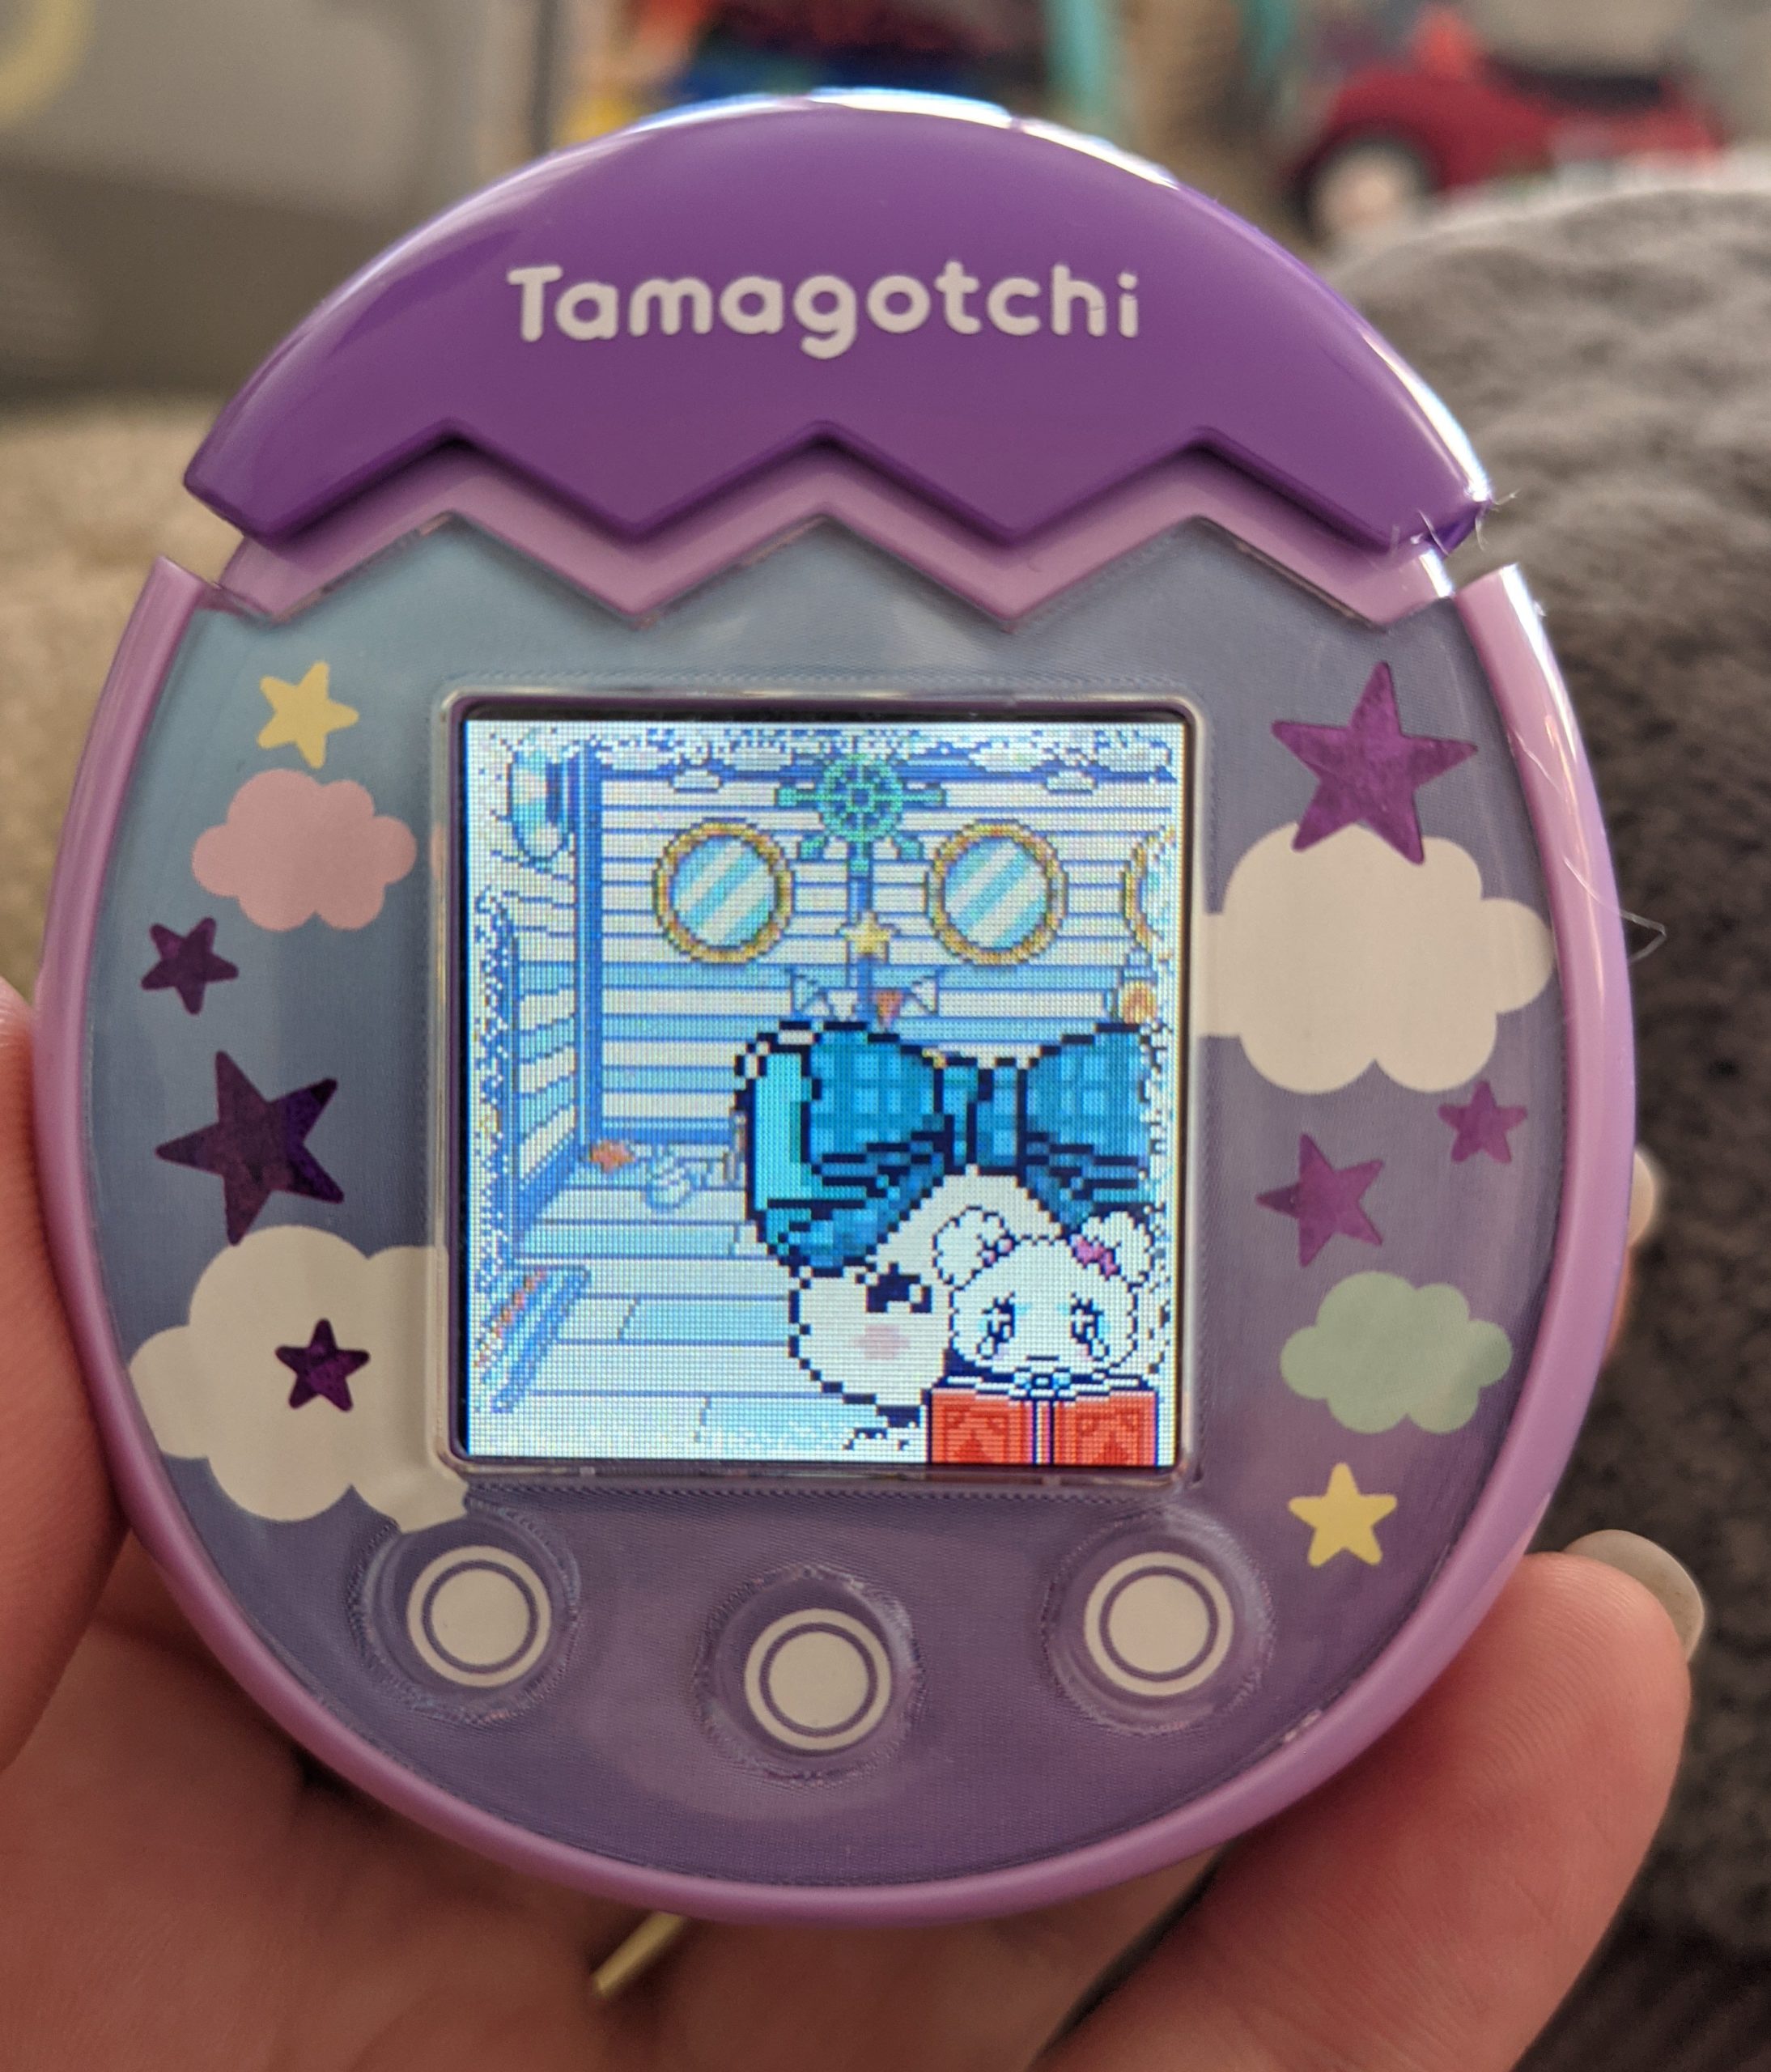 When your Tamagotchi is ready to return to its home planet, it will ask you to start putting together a photo album and go through the precious memories.  (Photo: Florence Ion / Gizmodo)